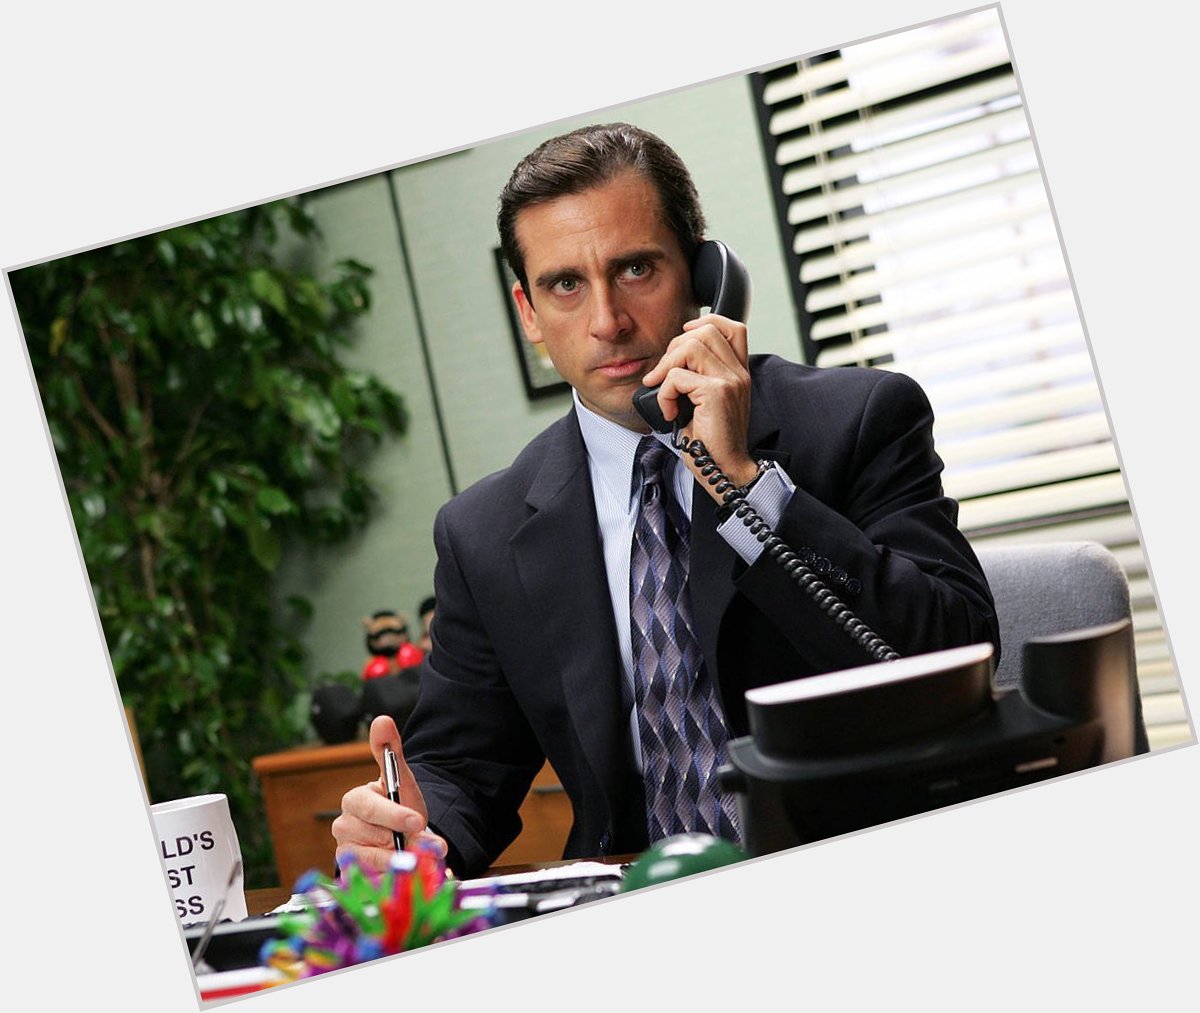 Happy Birthday to Steve Carell who turns 55 today! 